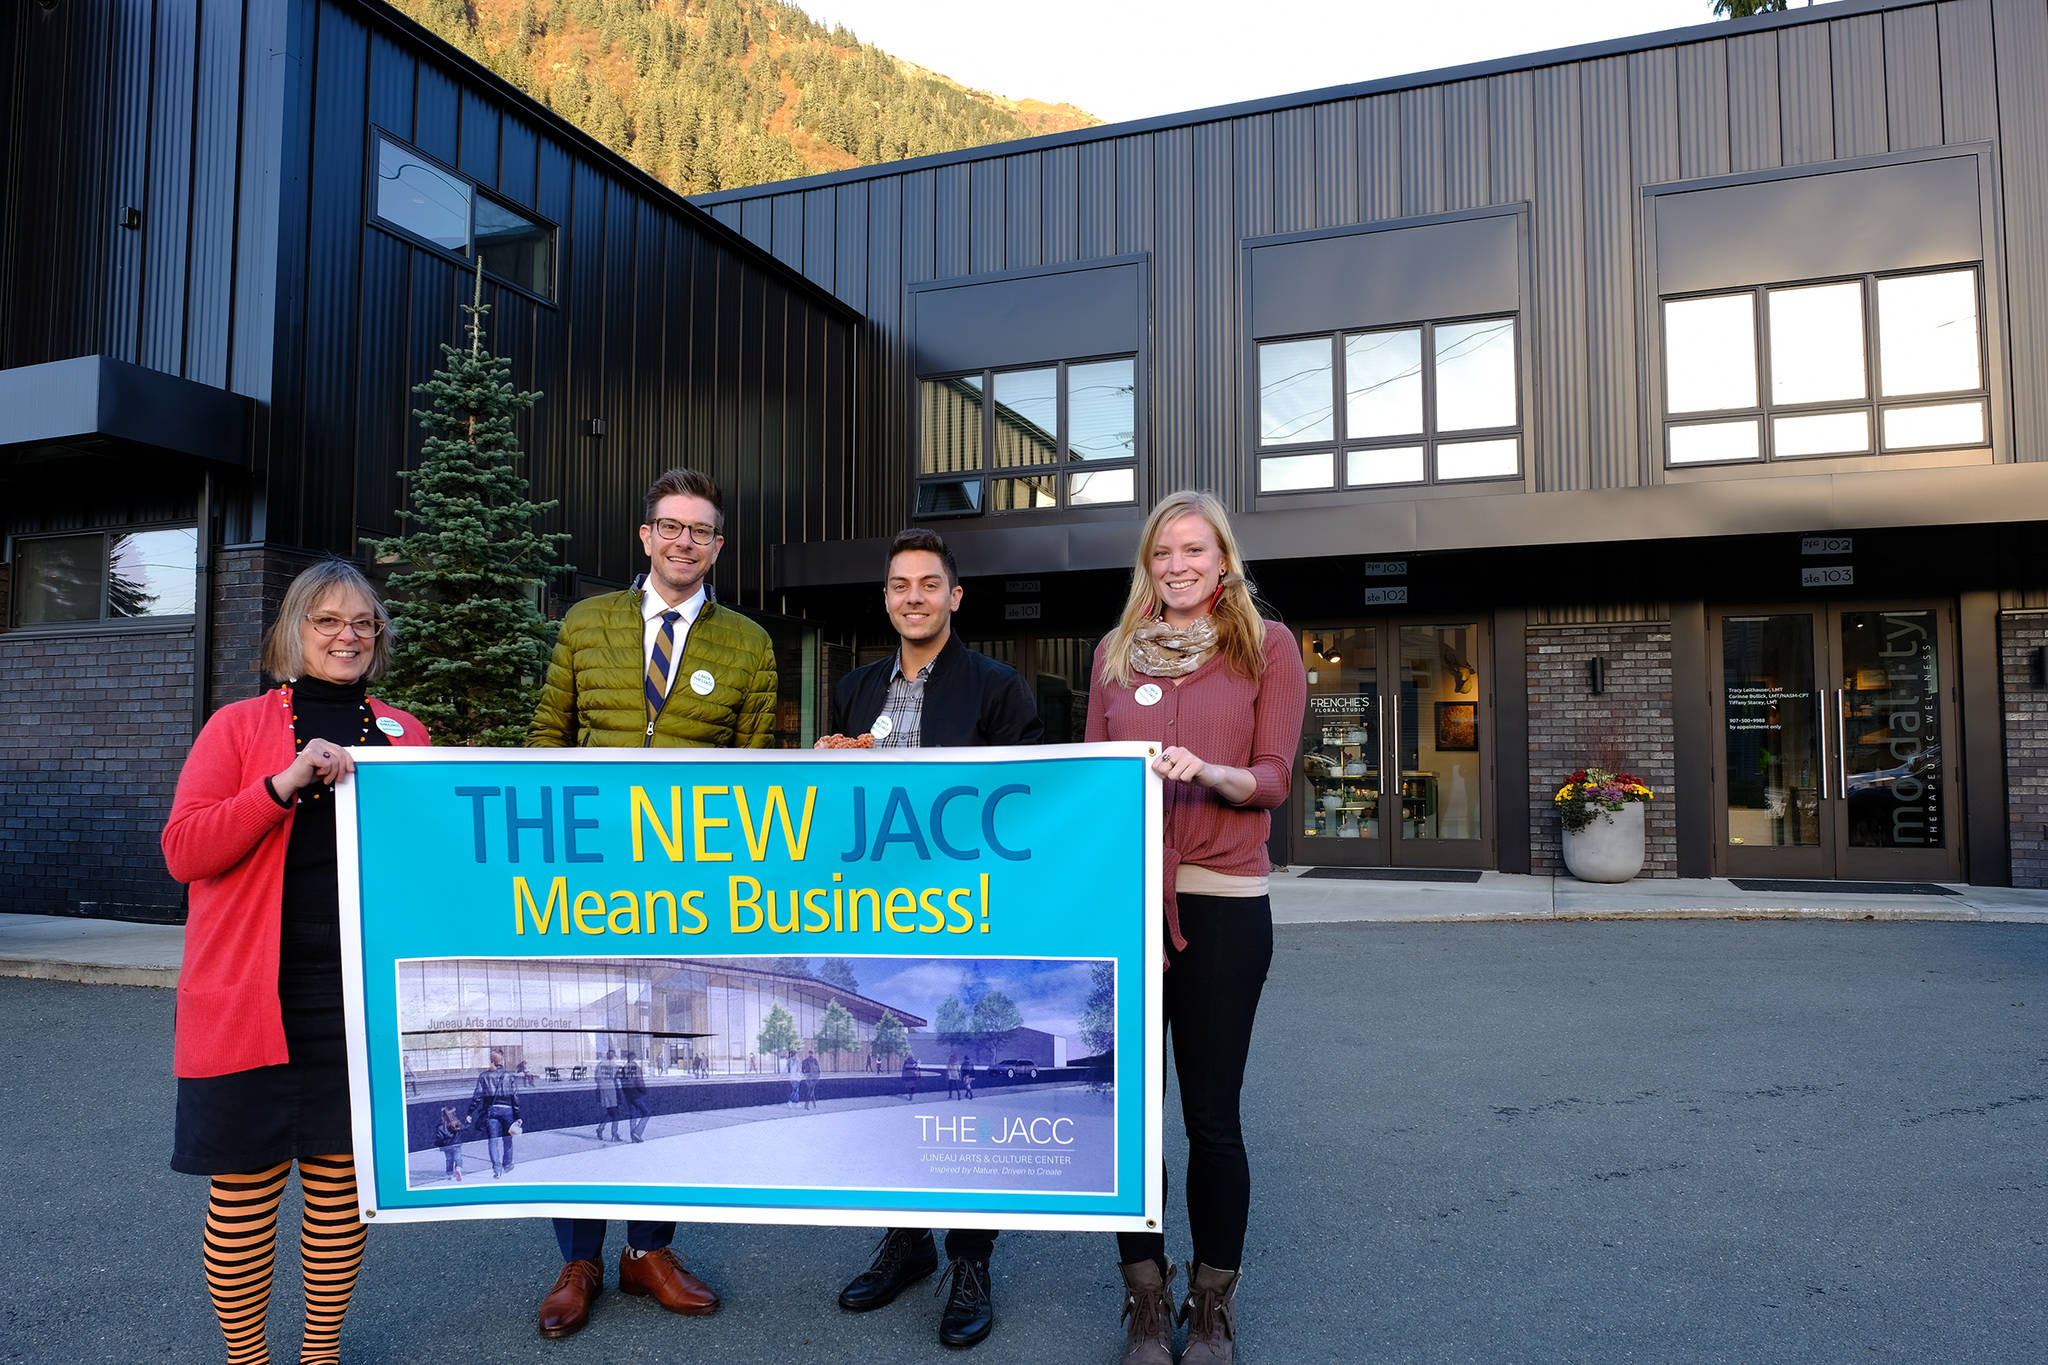 Juneau Arts & Humanities Council Executive Director Nancy DeCherney, Jeremy Bauer and Jason Clifton of Bauer/Clifton Interiors and fundraising assistant manager for the New JACC Rachelle Bonnet stand with a New JACC banner. Bauer and Clifton are the latest major donors to the proposed project. (Courtest Photo | For the JAHC)